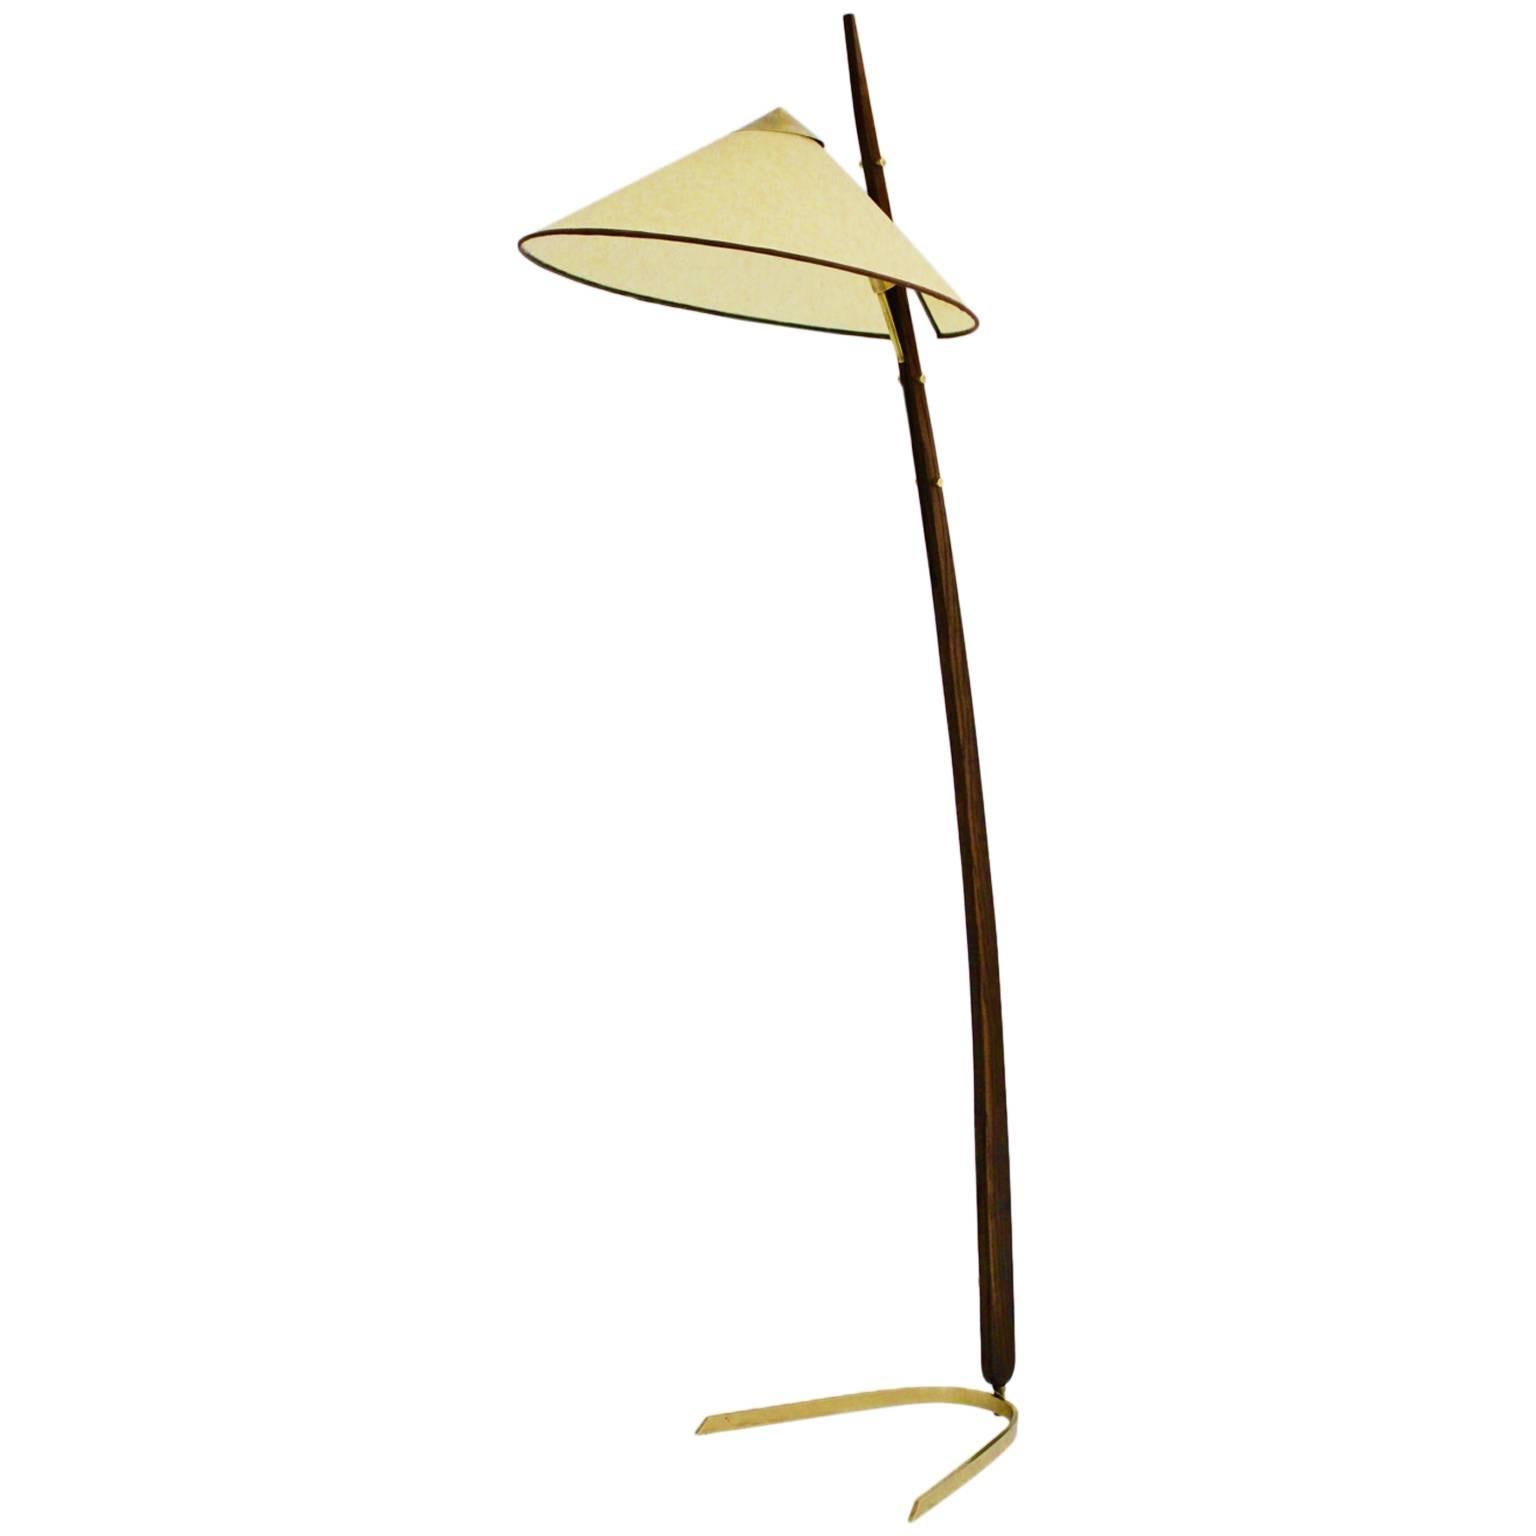 Oak brass Mid-Century Modern floor lamp, which was designed and manufactured by Rupert Nikoll 1950s Austria.
The floor lamp is composed of a solid oak stem with brass details and a parchment paper shade.
Beautiful brass details like fittings and